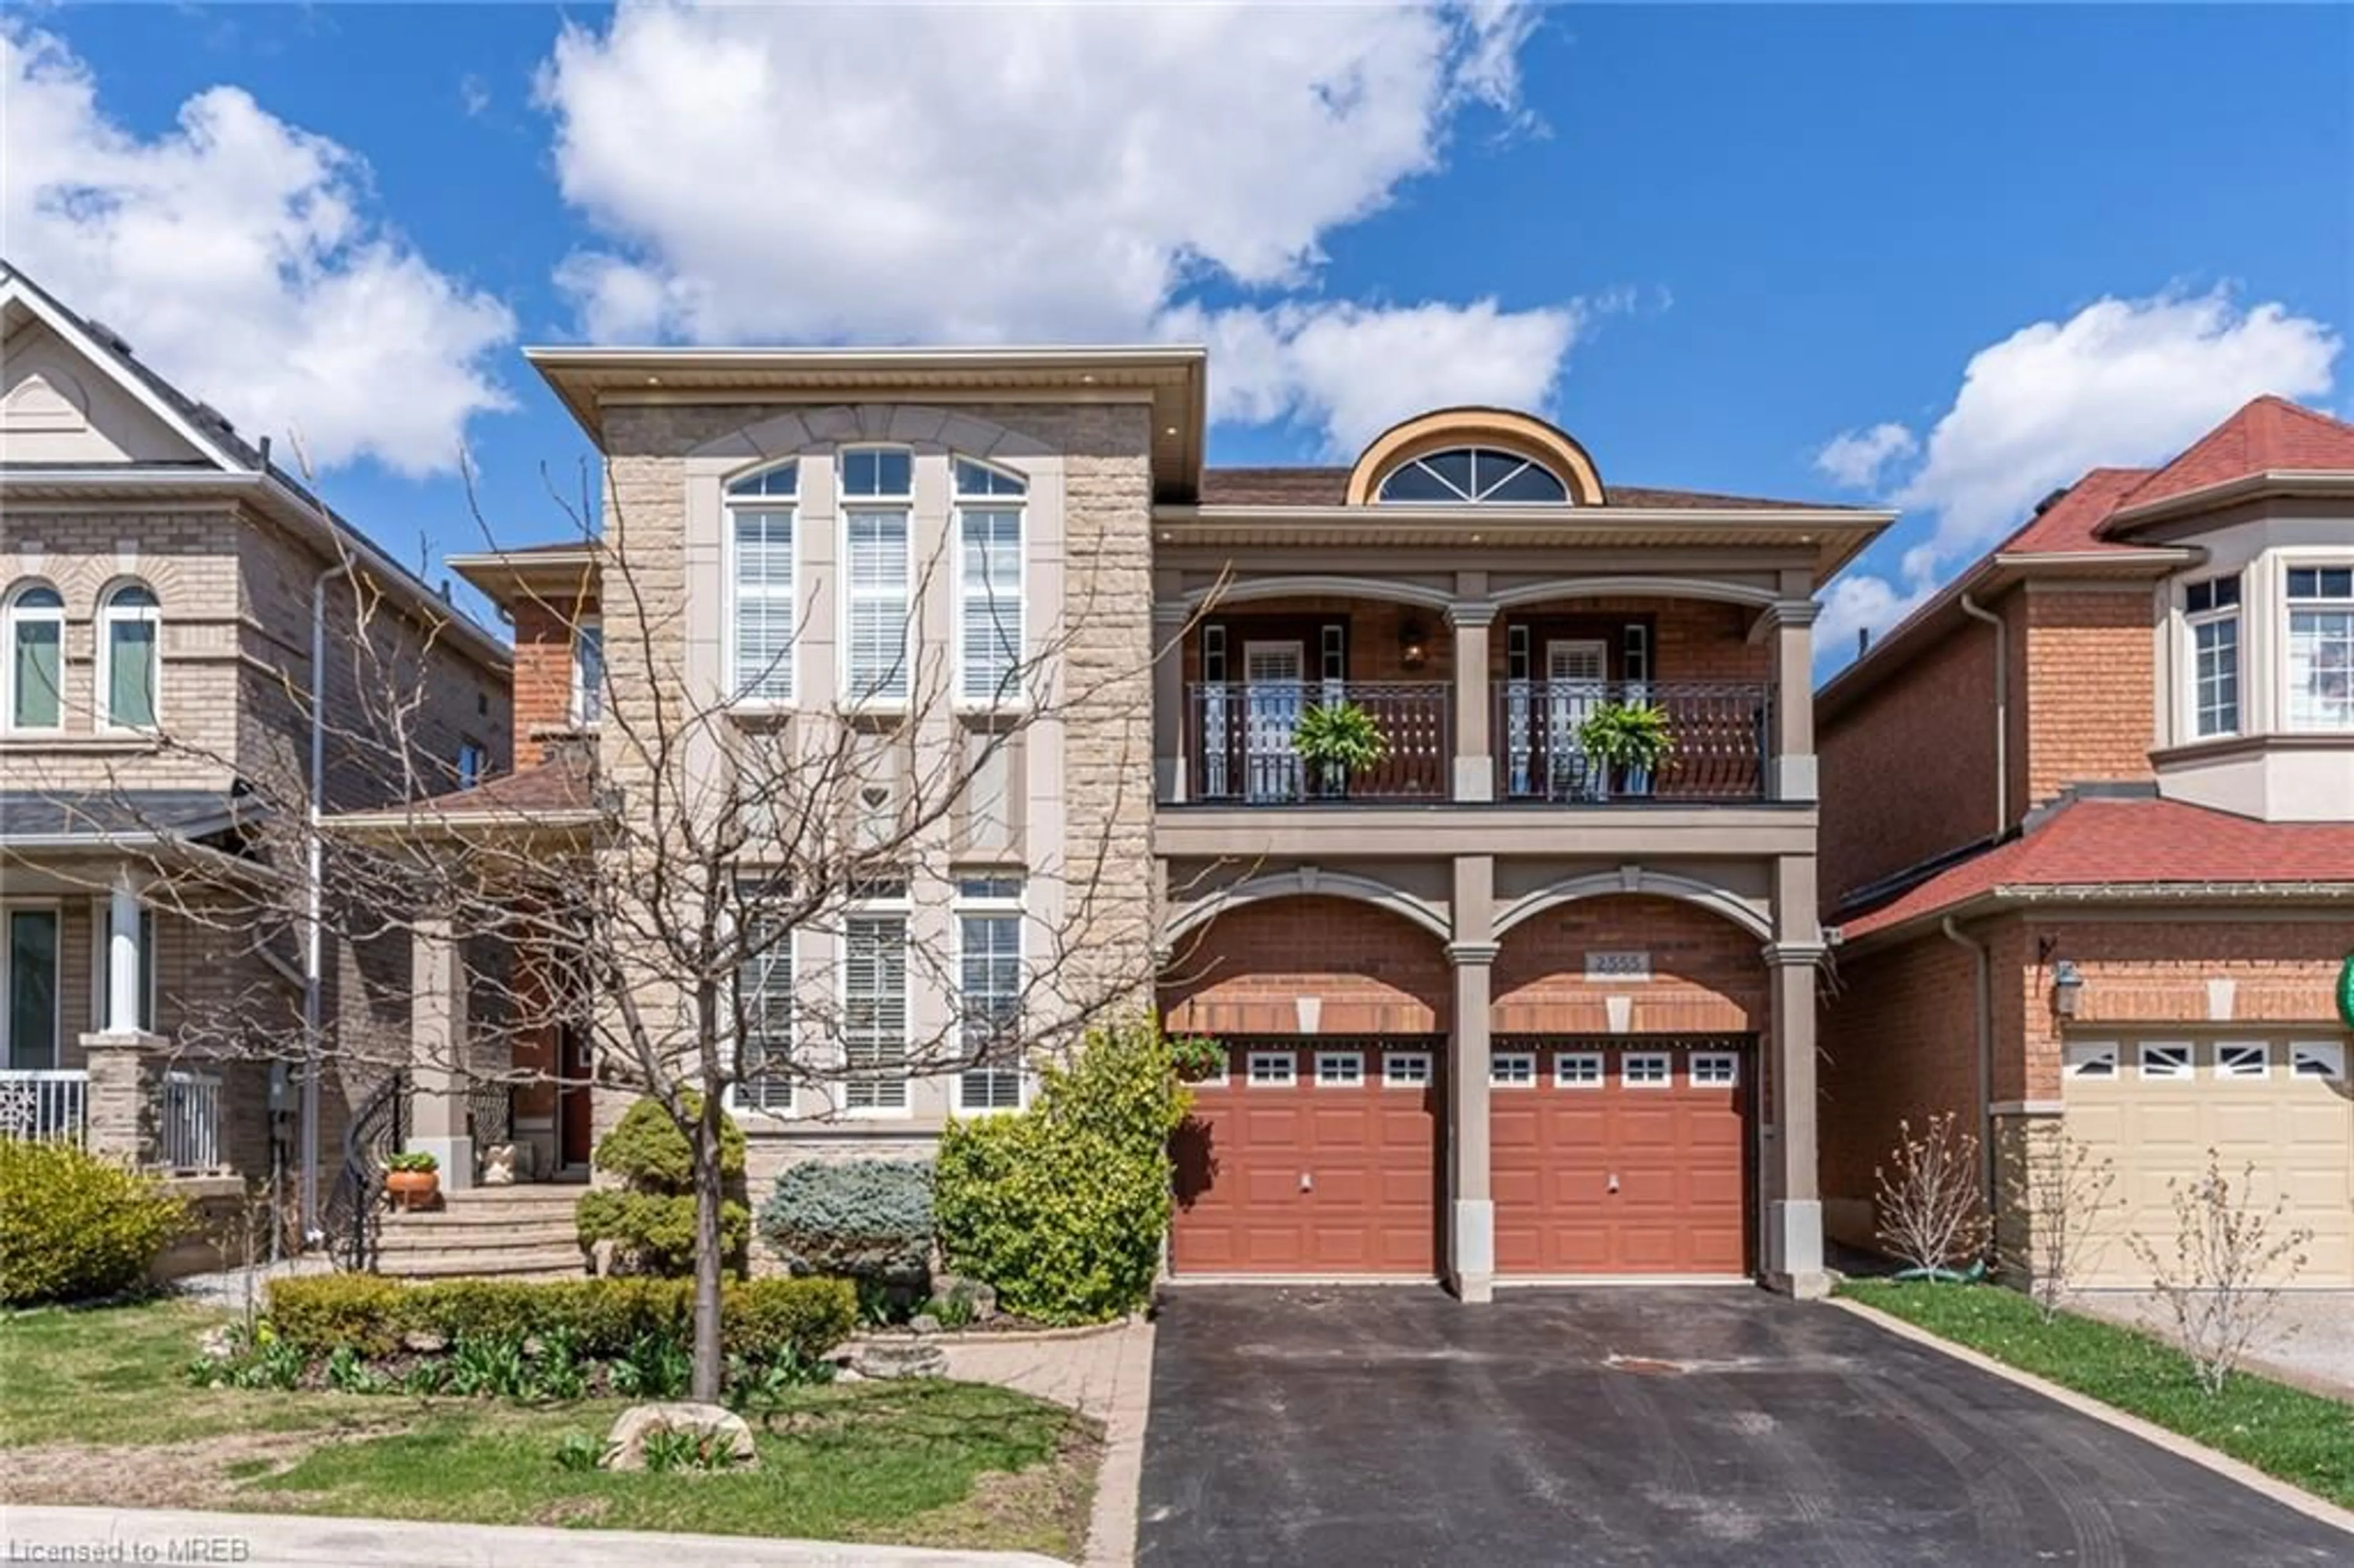 Home with brick exterior material for 2555 Nichols Dr, Oakville Ontario L6H 7L3